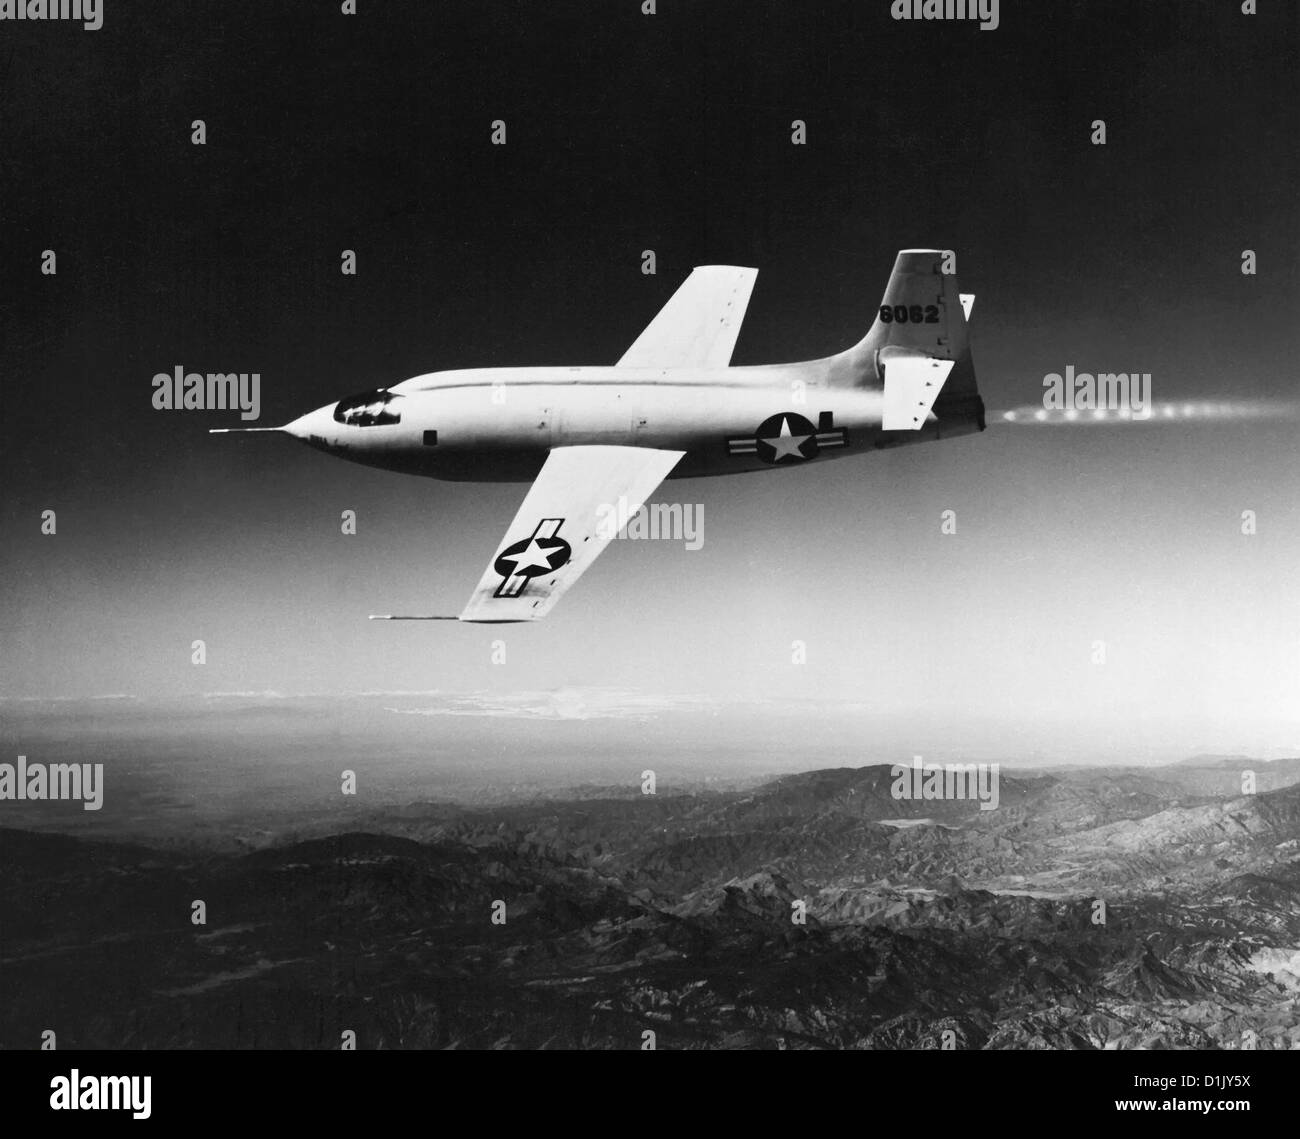 Air Force Captain Charles E. Chuck Yeager pilots the bullet shaped Bell X-1 after becoming the first person to break the sound barrier October 14,1947 in Palmdale, CA. Stock Photo